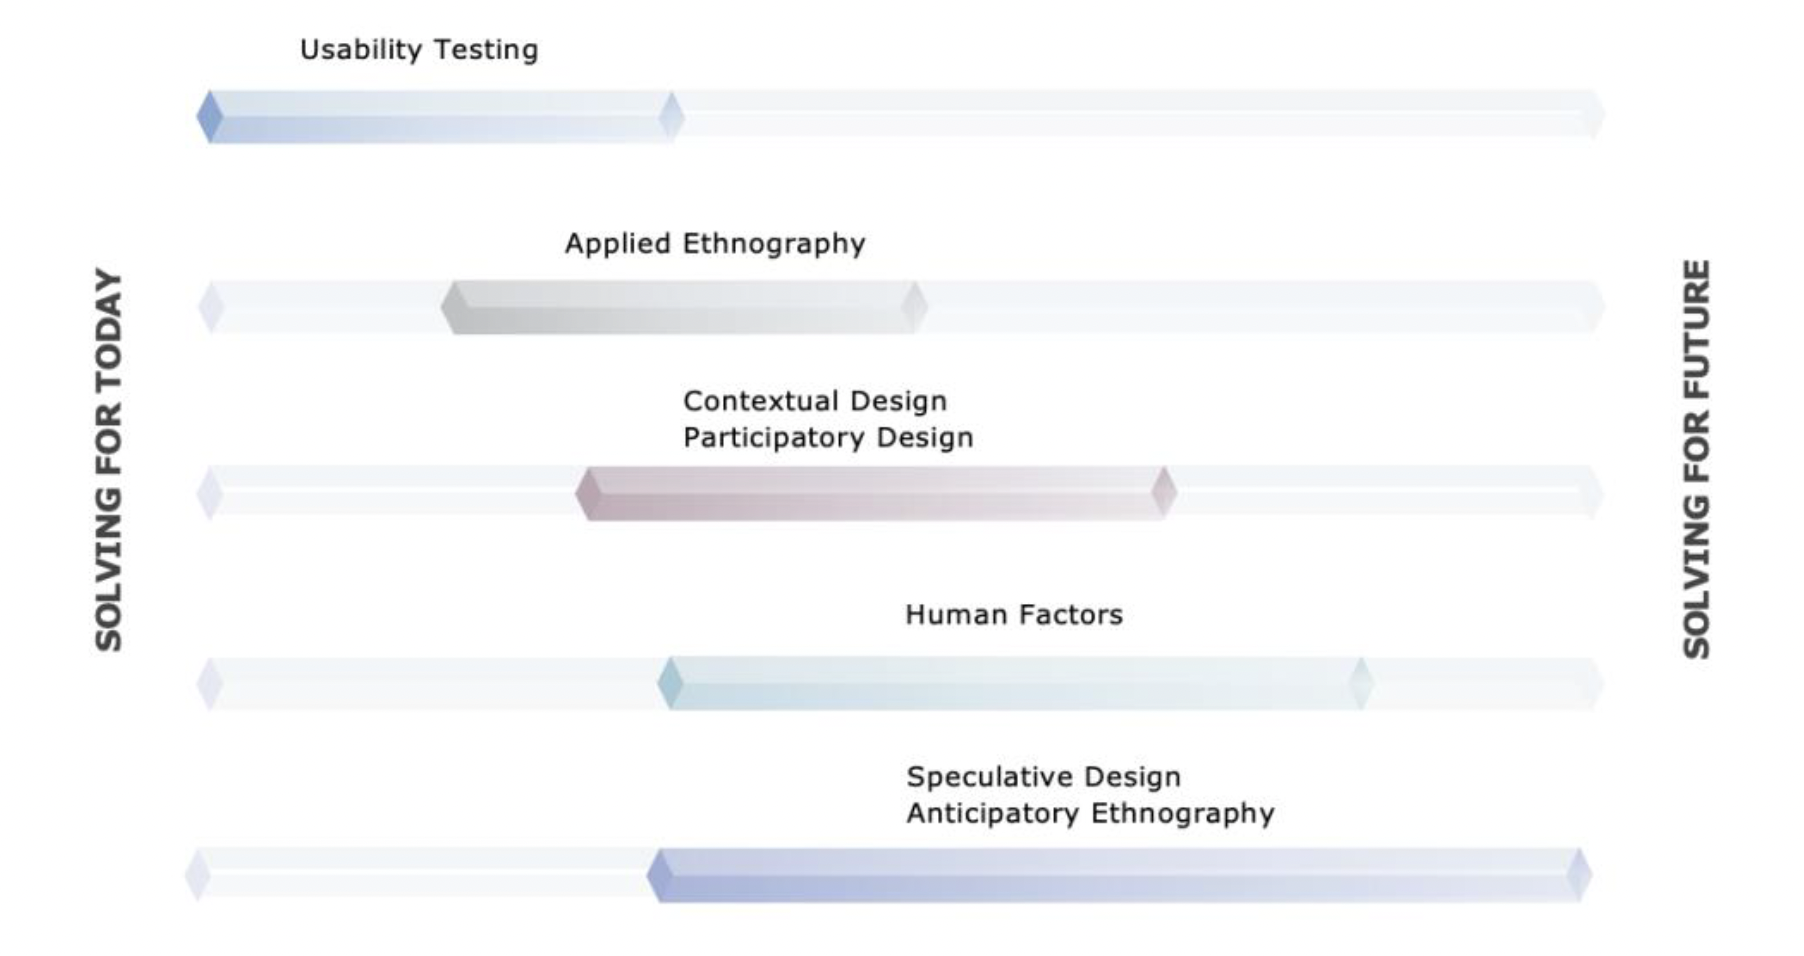 Figure shows a spectrum between research methodologies solving for today on the left and methodologies focused on solving for future on the right. Usability testing is placed on the left side, speculative design and anticipatory ethnography is positioned on the right side. Applied ethnography is positioned in the center inclining towards the left, contextual and participatory design are placed in the center, and human factors is placed in the center inclining towards the right.